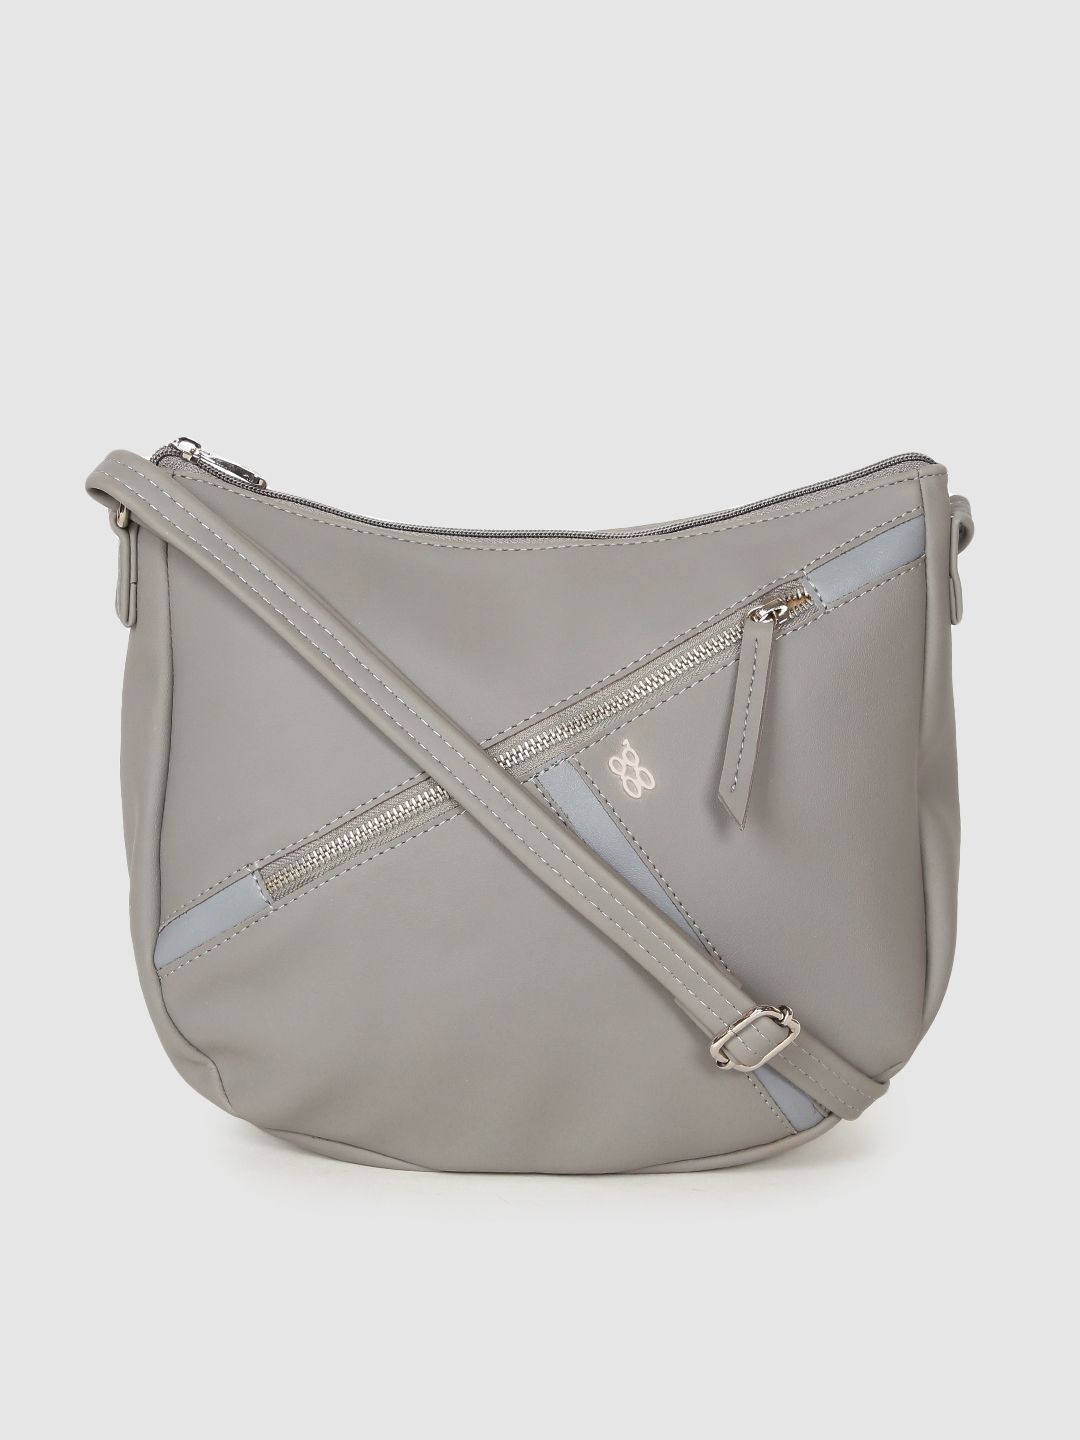 Baggit Grey Solid Regular Structured Hobo Bag with Applique Detail Price in India